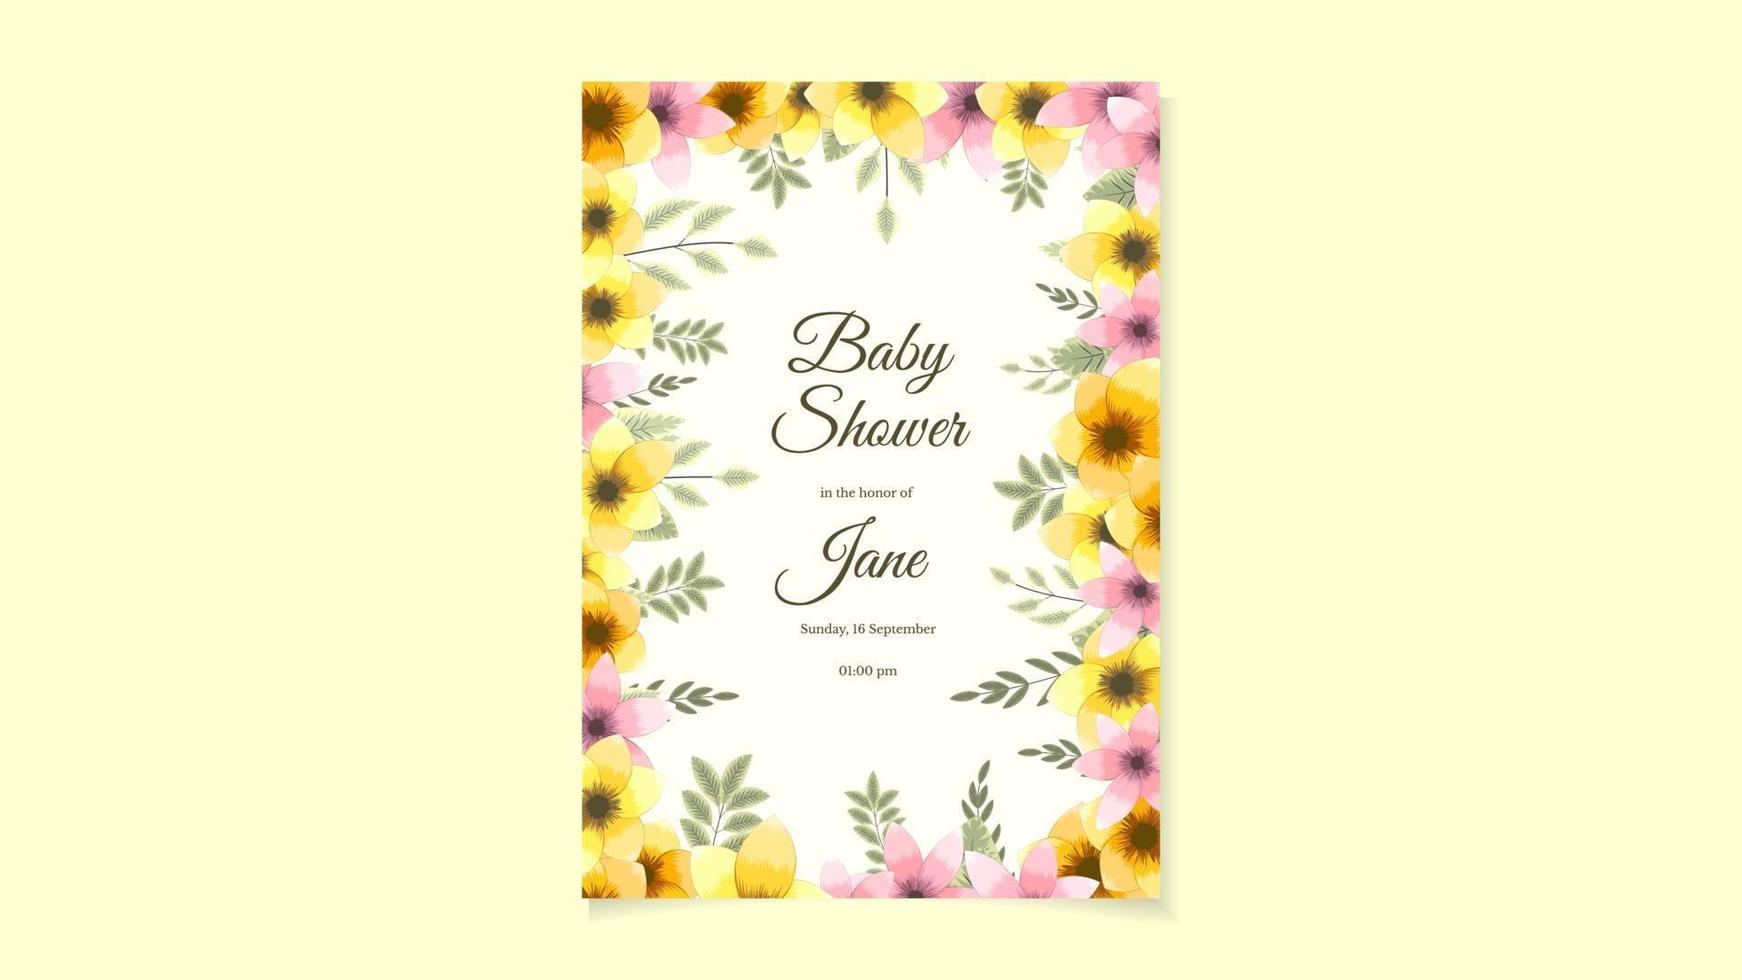 Colorful Floral Baby Shower Card Layout pretty flowers botanical theme vector